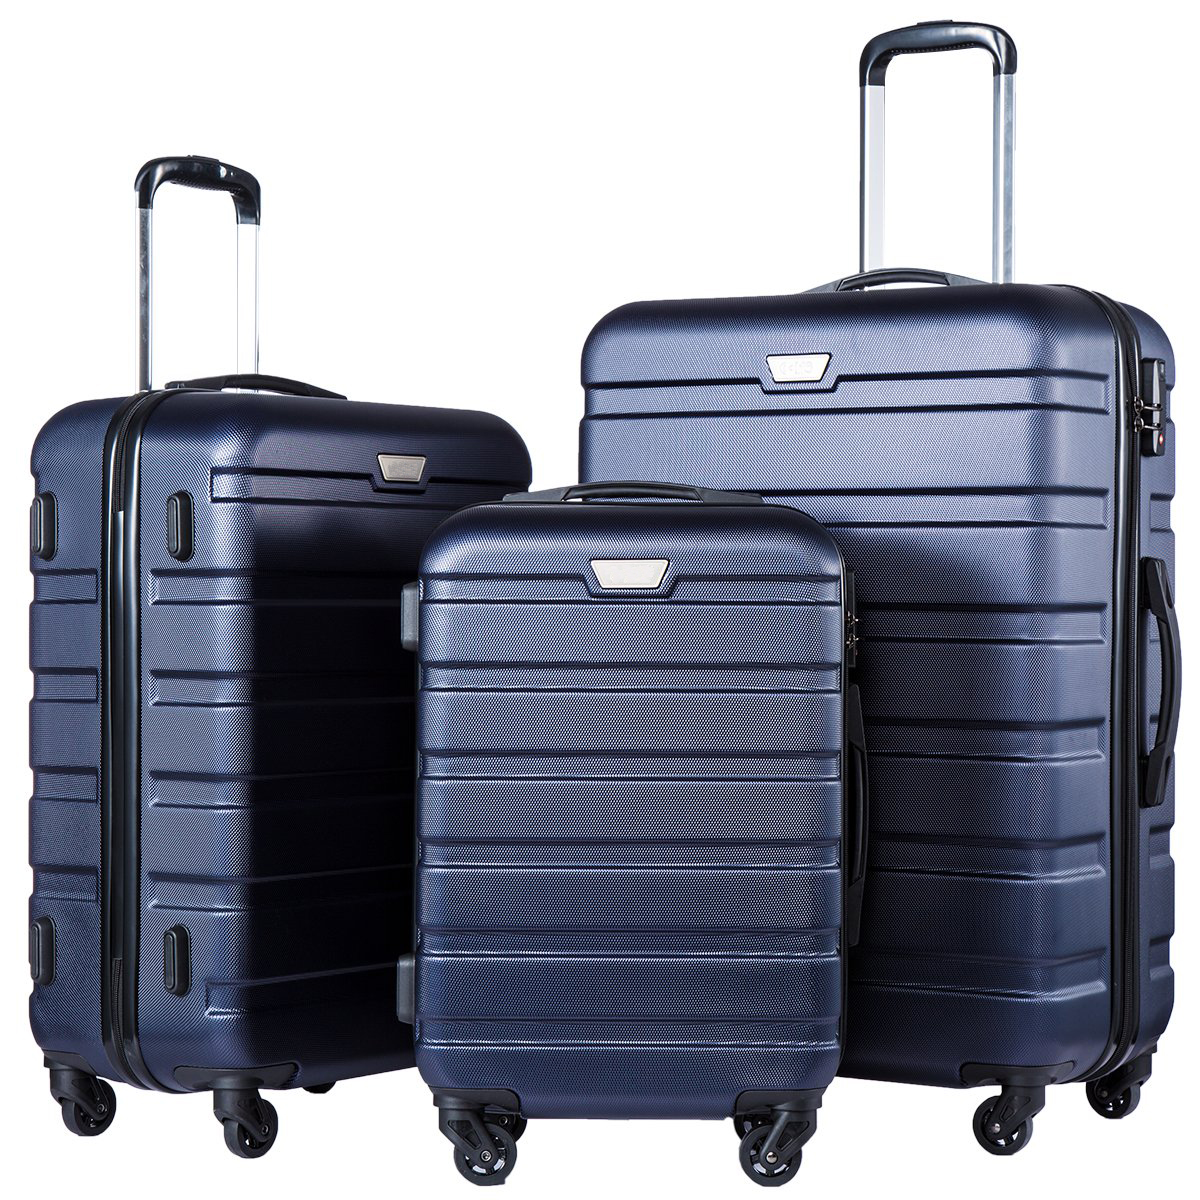 Multi-piece luggage case large capacity size wear resistant and durable